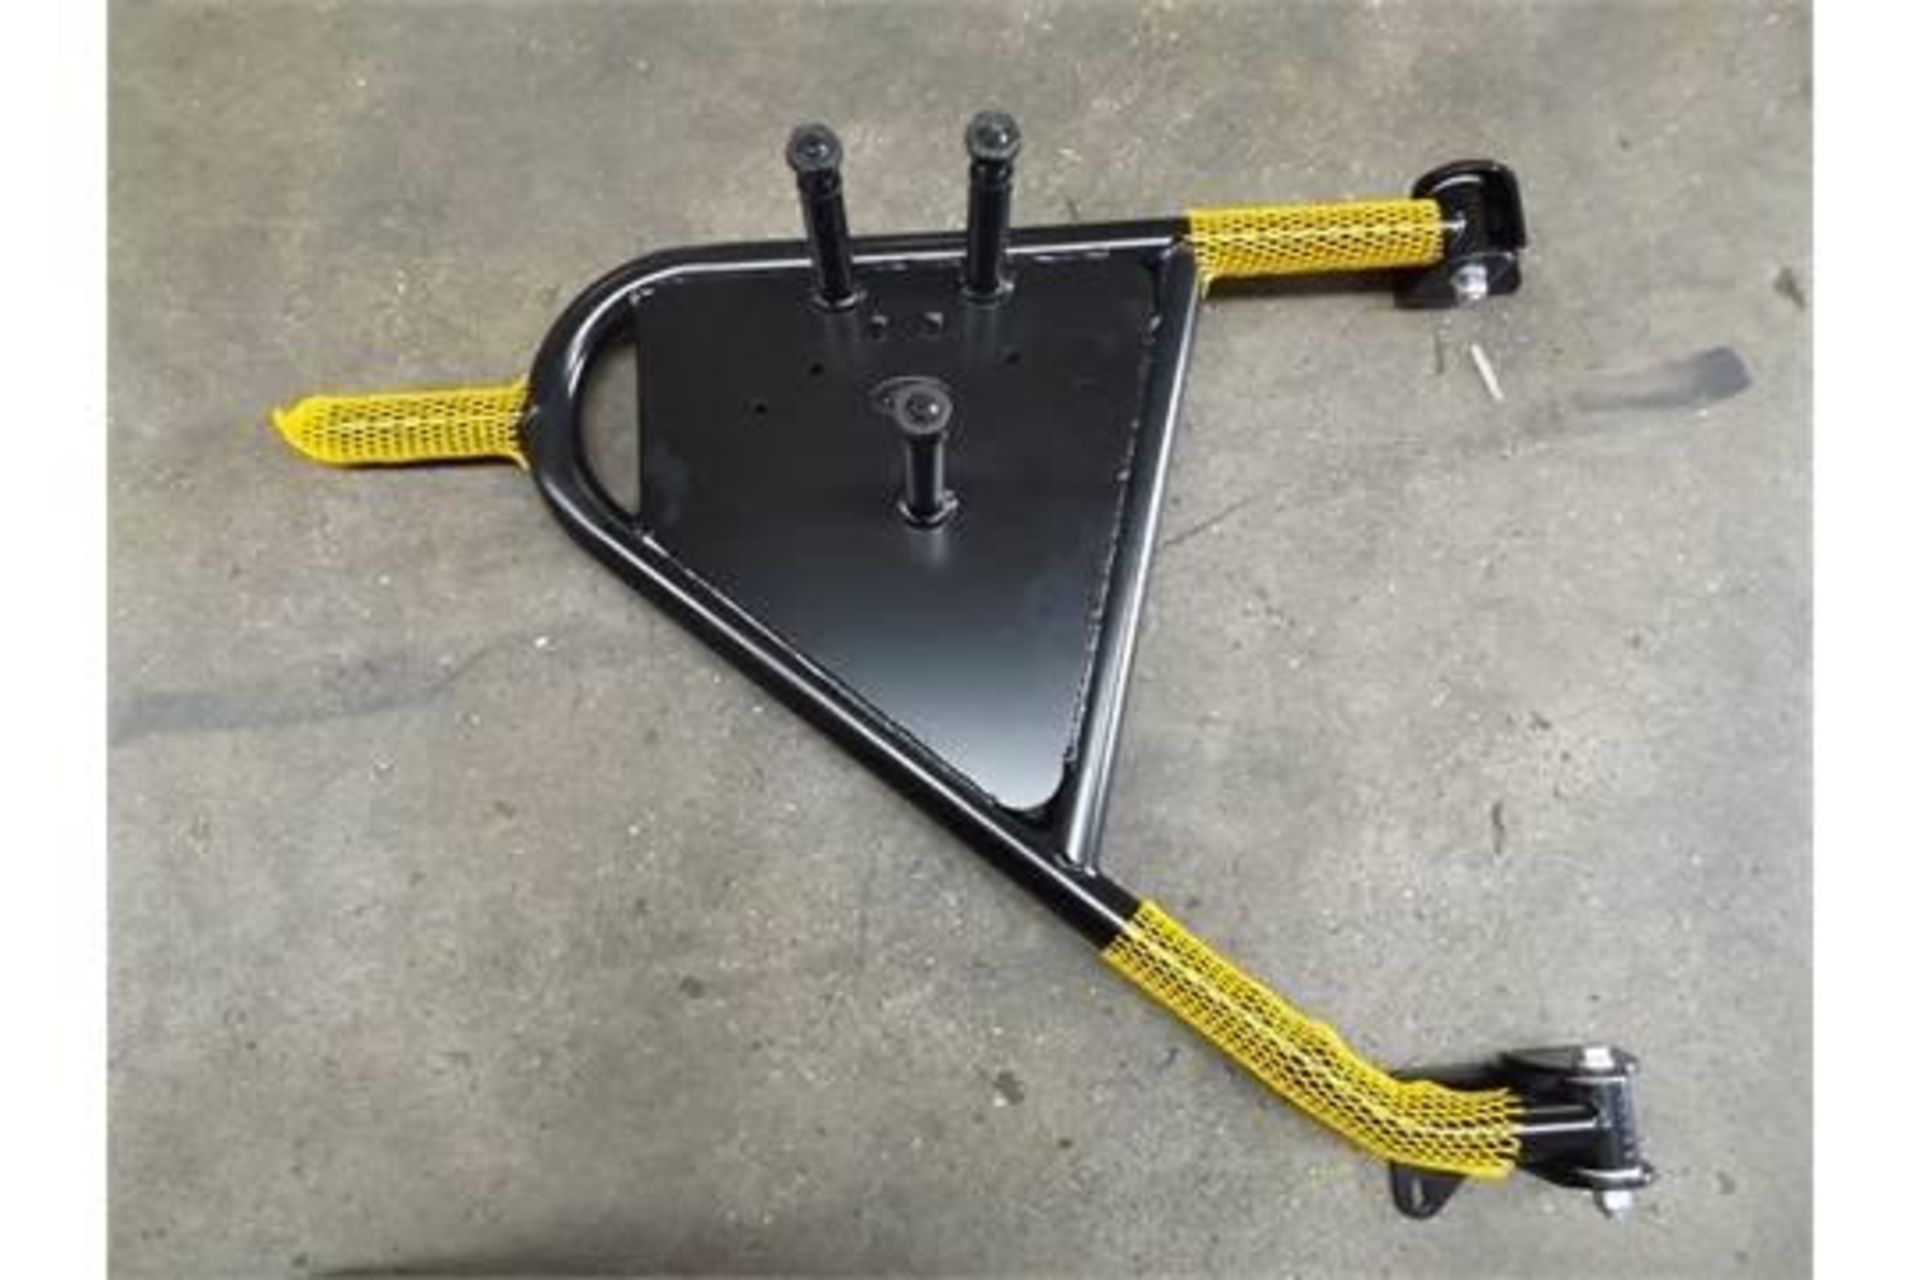 10 x Land Rover Defender Swing Out Spare Wheel Carrier Kits P/No VPLDR0129 - Image 3 of 10